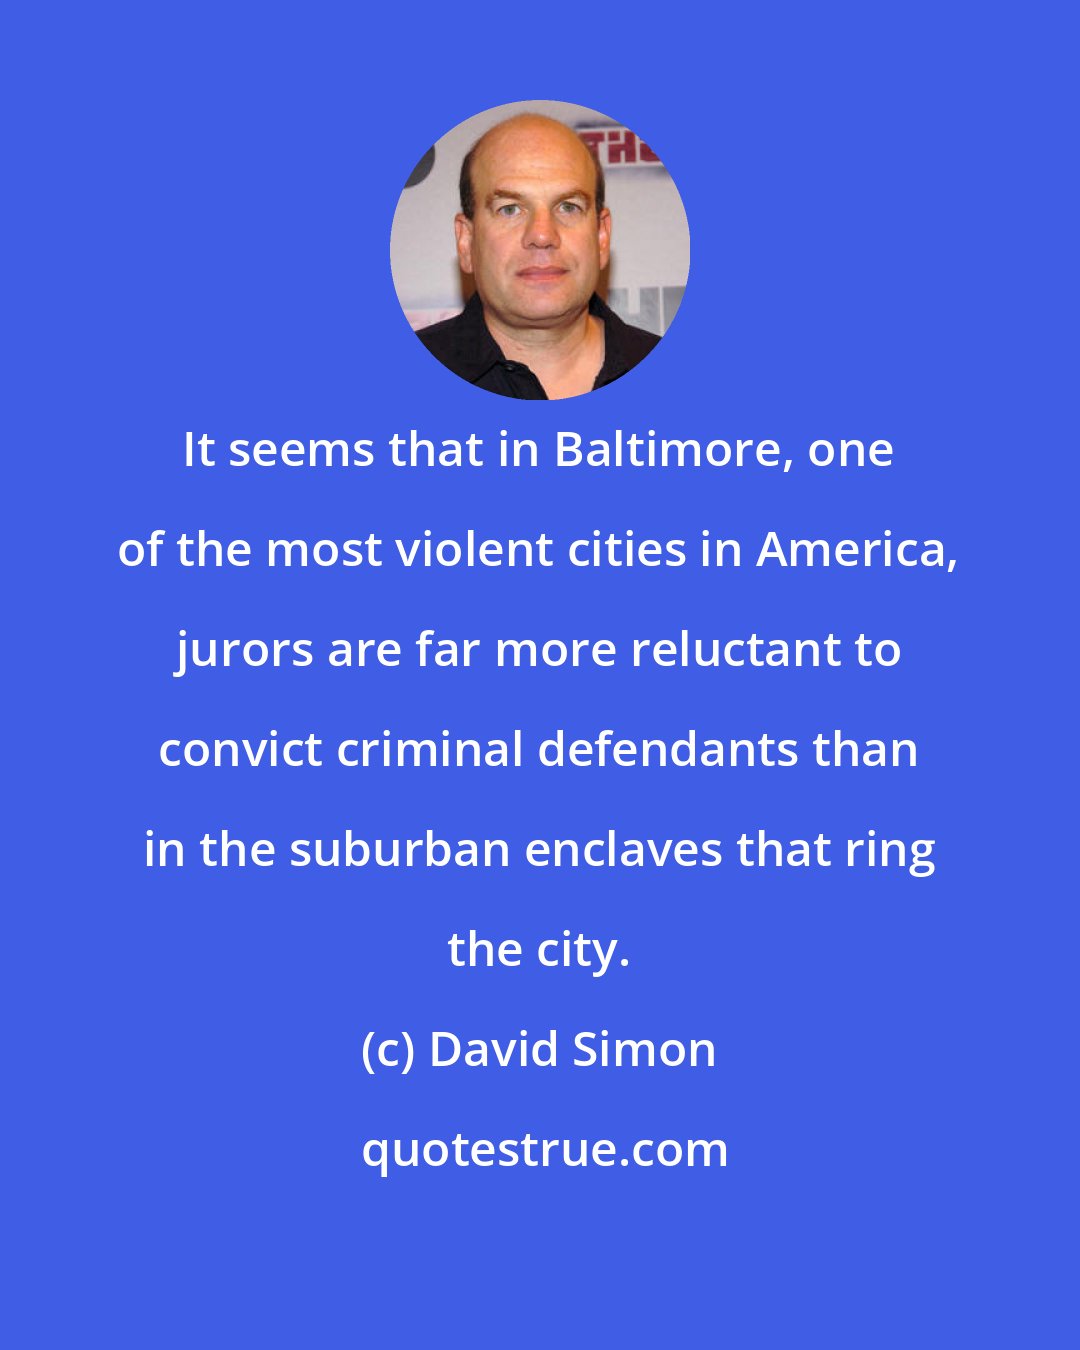 David Simon: It seems that in Baltimore, one of the most violent cities in America, jurors are far more reluctant to convict criminal defendants than in the suburban enclaves that ring the city.